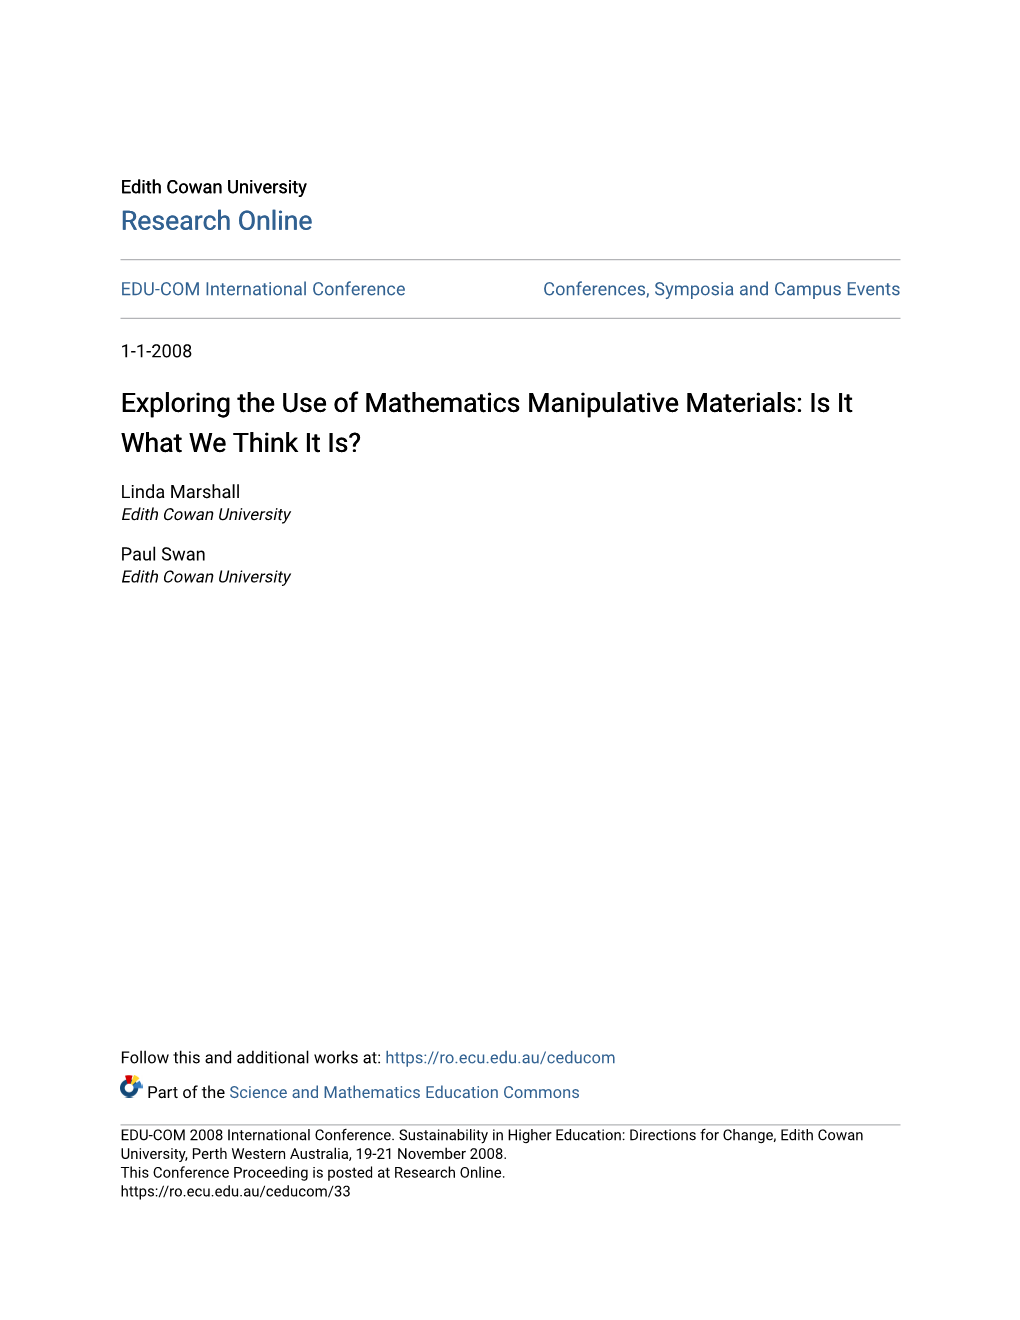 Exploring the Use of Mathematics Manipulative Materials: Is It What We Think It Is?